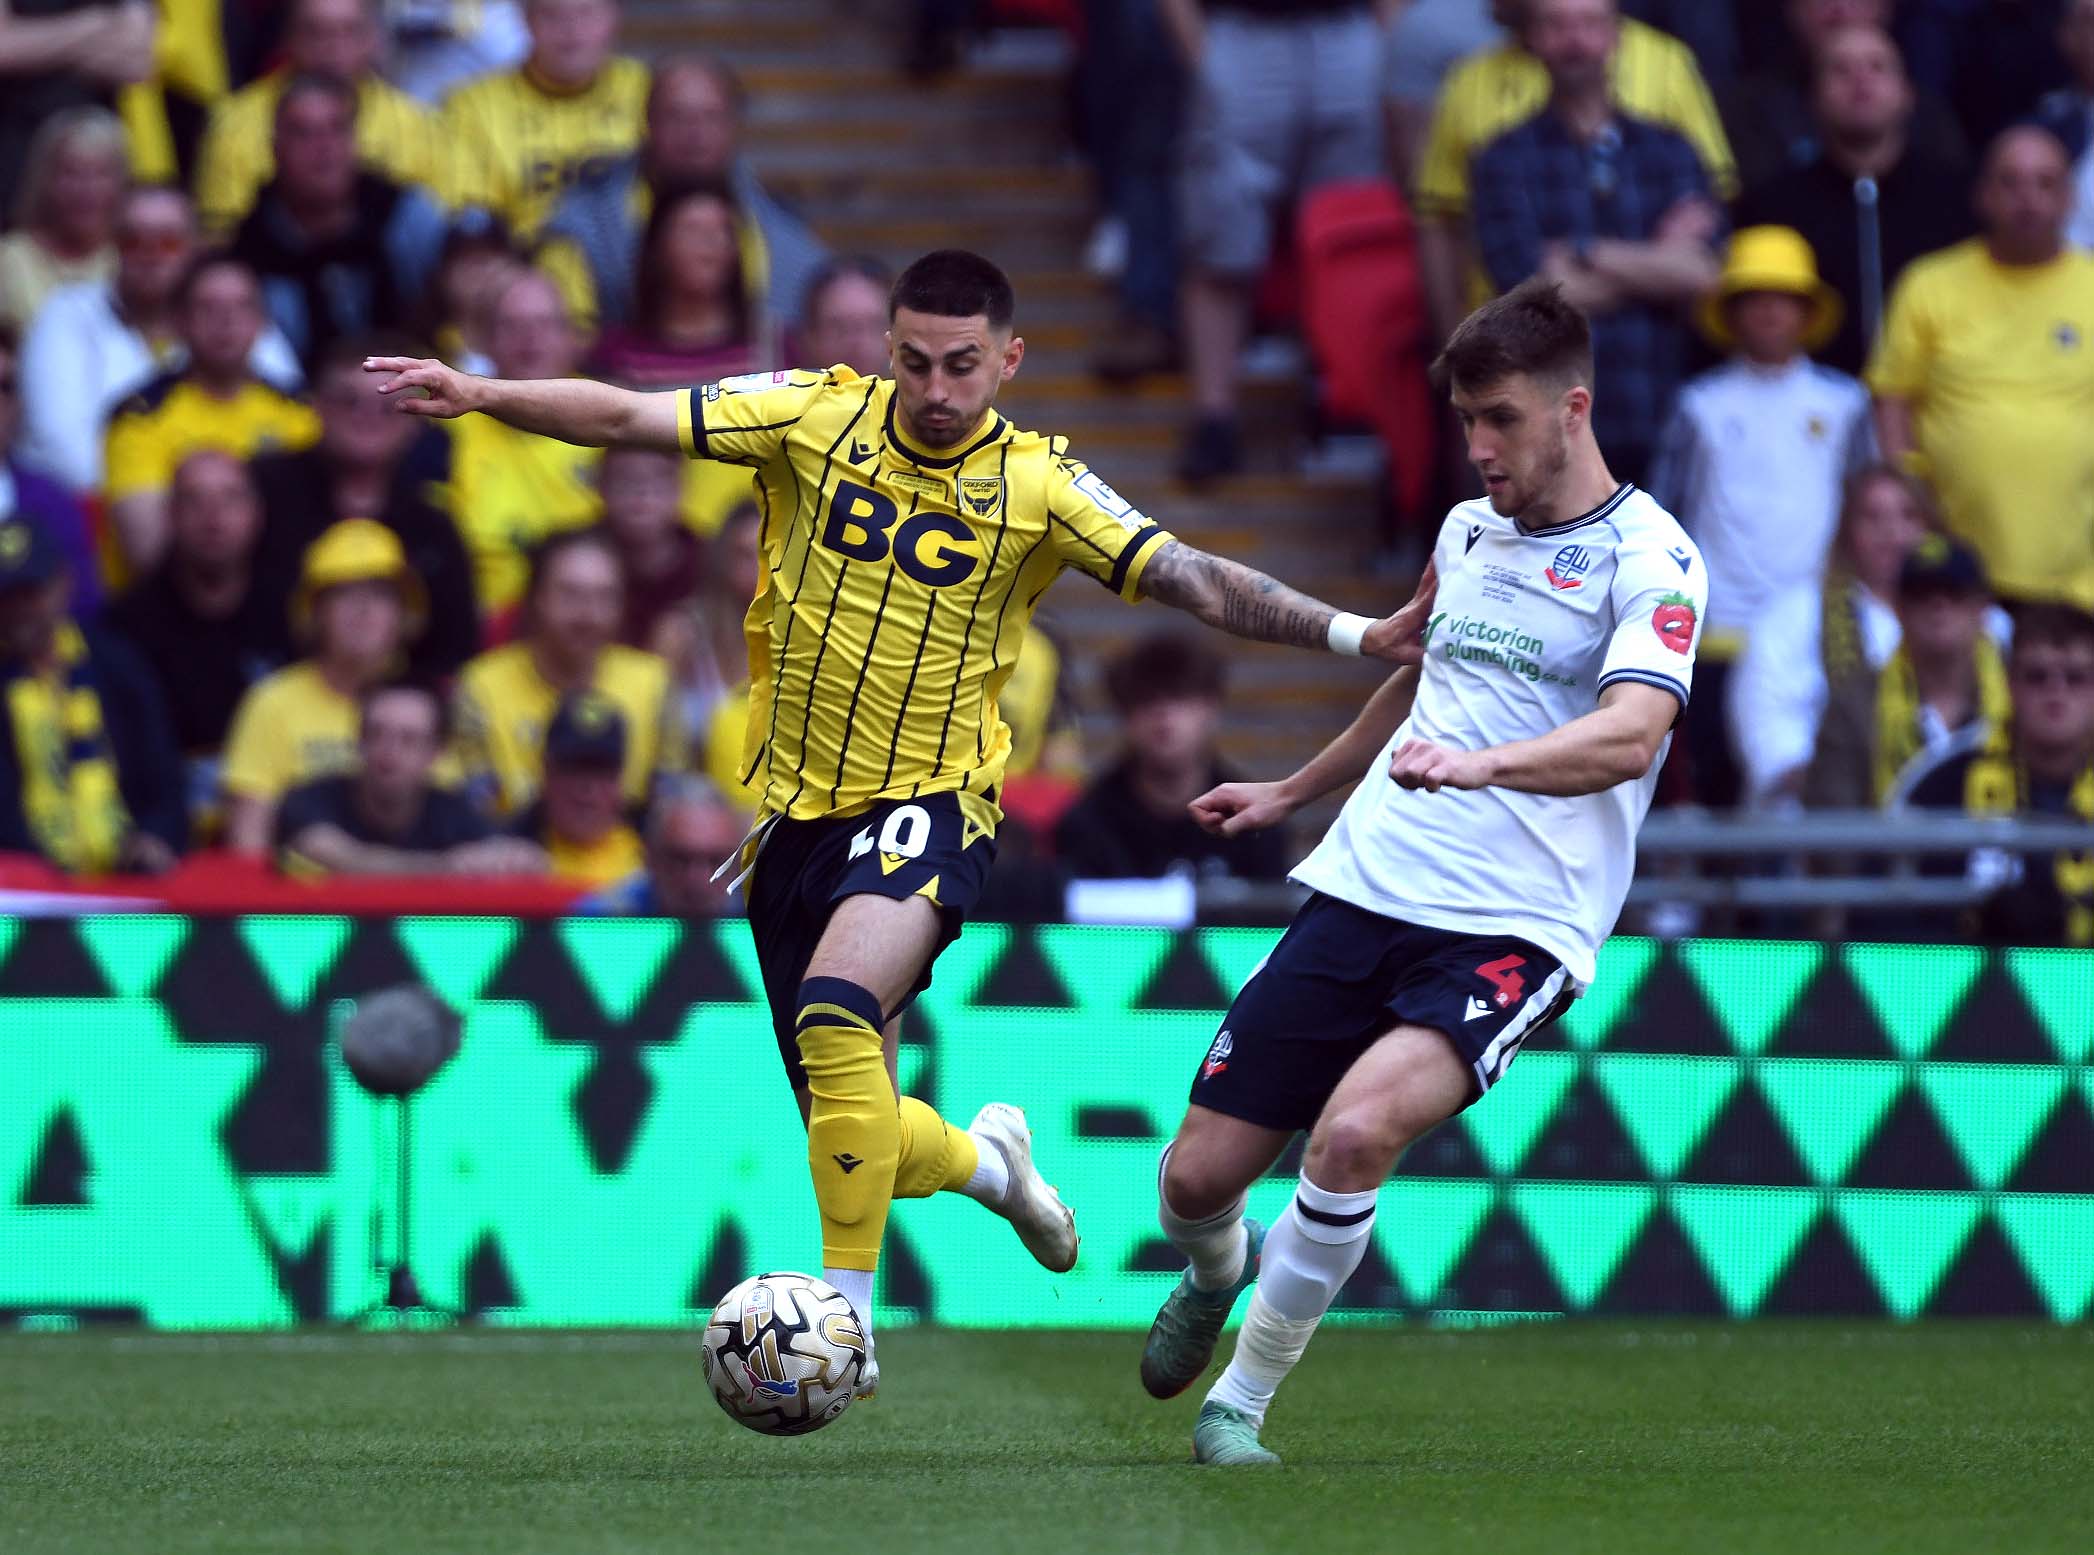 Oxford United winger Owen Dale on promotion to Championship